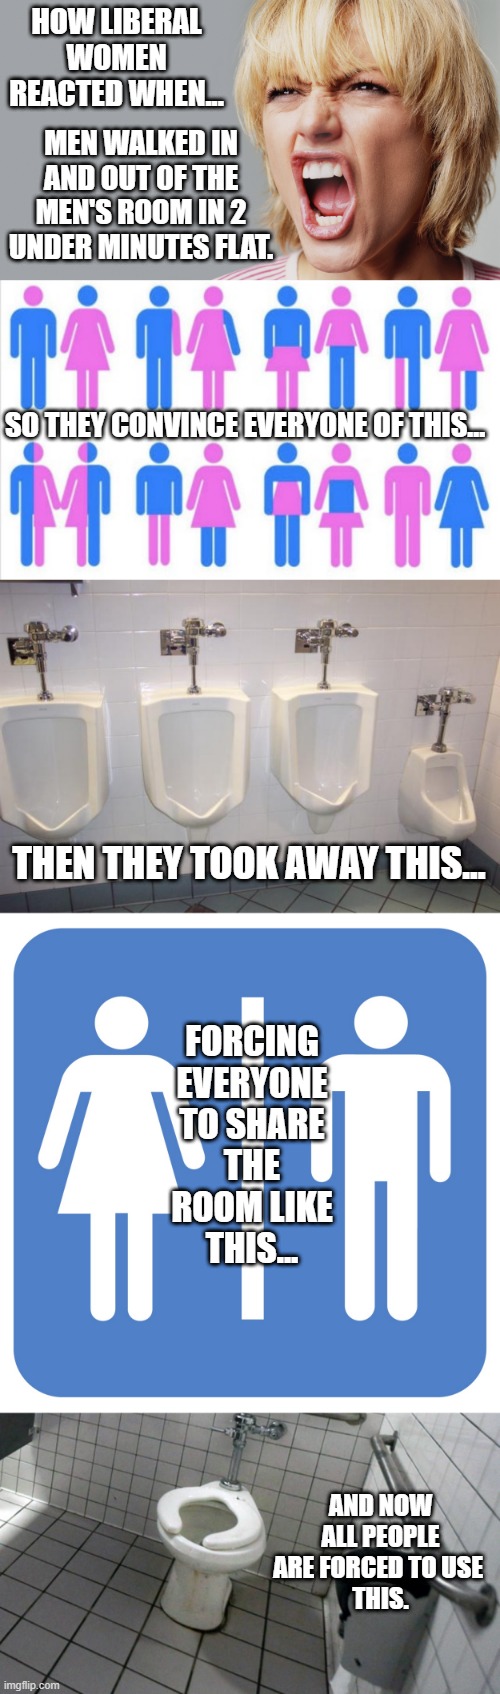 Urinals equal clean toilets | HOW LIBERAL WOMEN REACTED WHEN... MEN WALKED IN AND OUT OF THE MEN'S ROOM IN 2 UNDER MINUTES FLAT. SO THEY CONVINCE EVERYONE OF THIS... THEN THEY TOOK AWAY THIS... FORCING EVERYONE TO SHARE THE ROOM LIKE THIS... AND NOW ALL PEOPLE ARE FORCED TO USE 
THIS. | image tagged in angry woman yelling,gender chart 58 genders,men's room urinals,restroom sign,public toilet,liberal logic | made w/ Imgflip meme maker